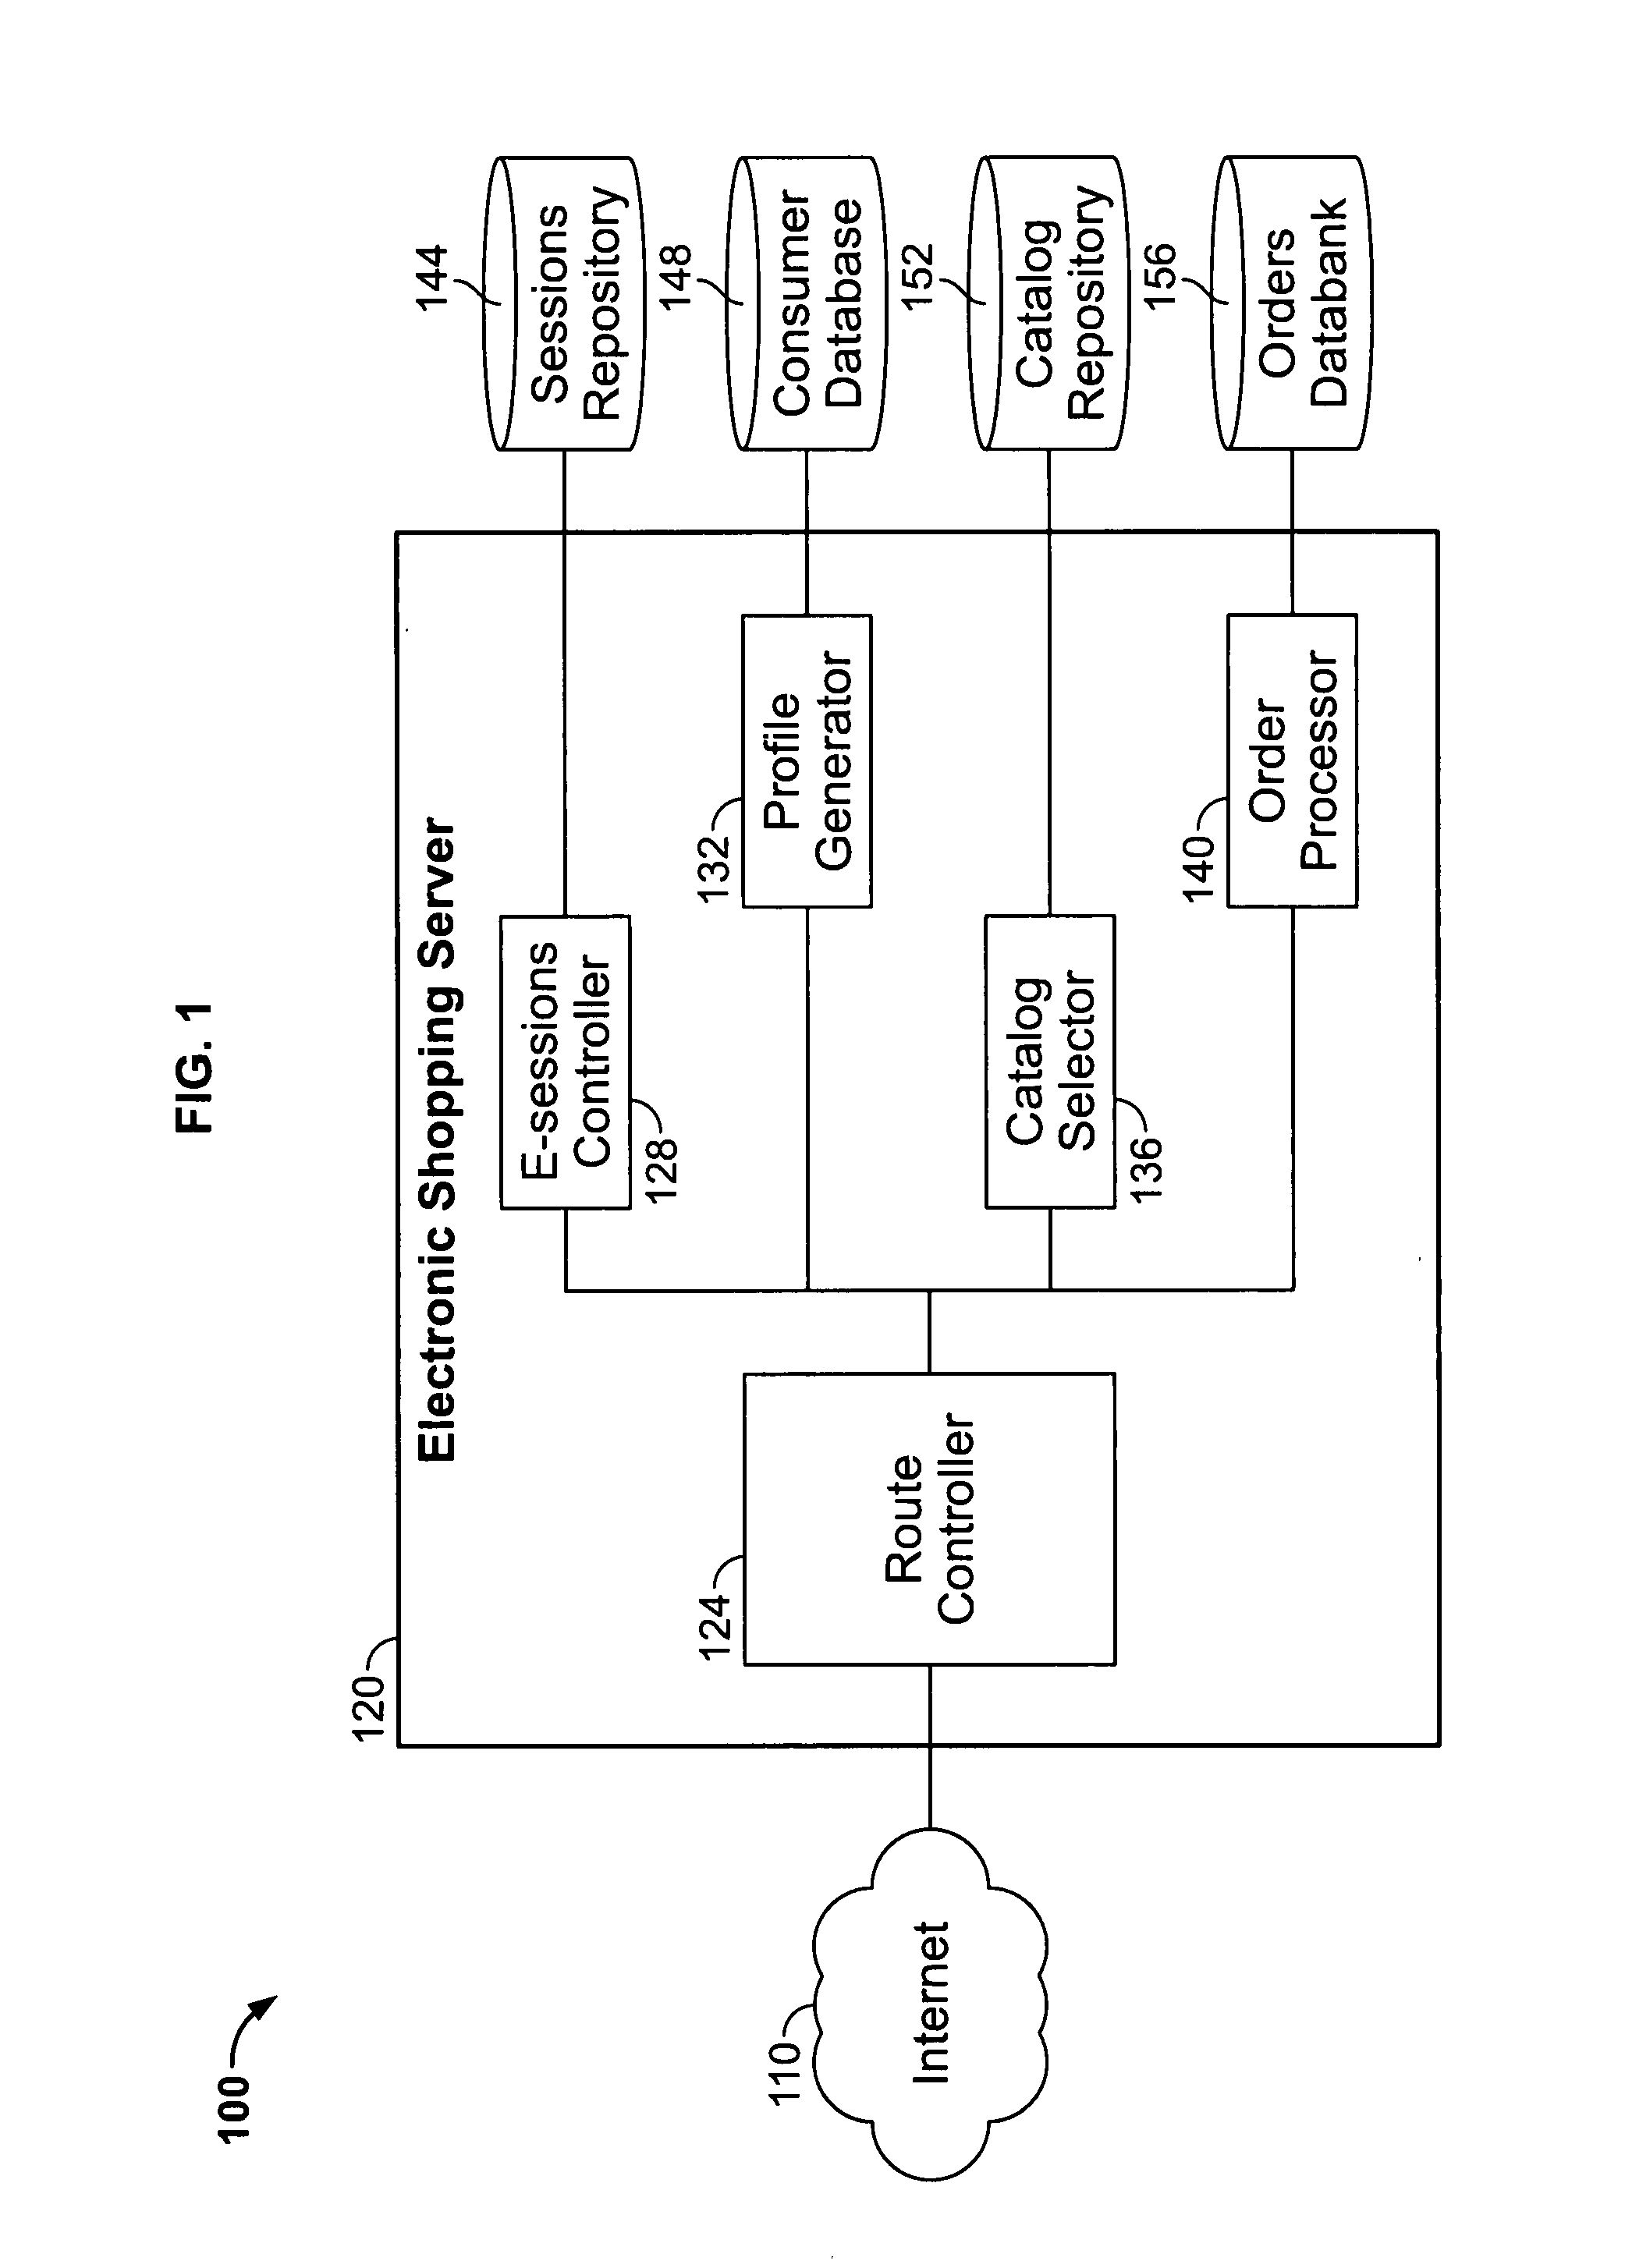 Method, system and computer program product for ordering merchandise in a global computer network environment